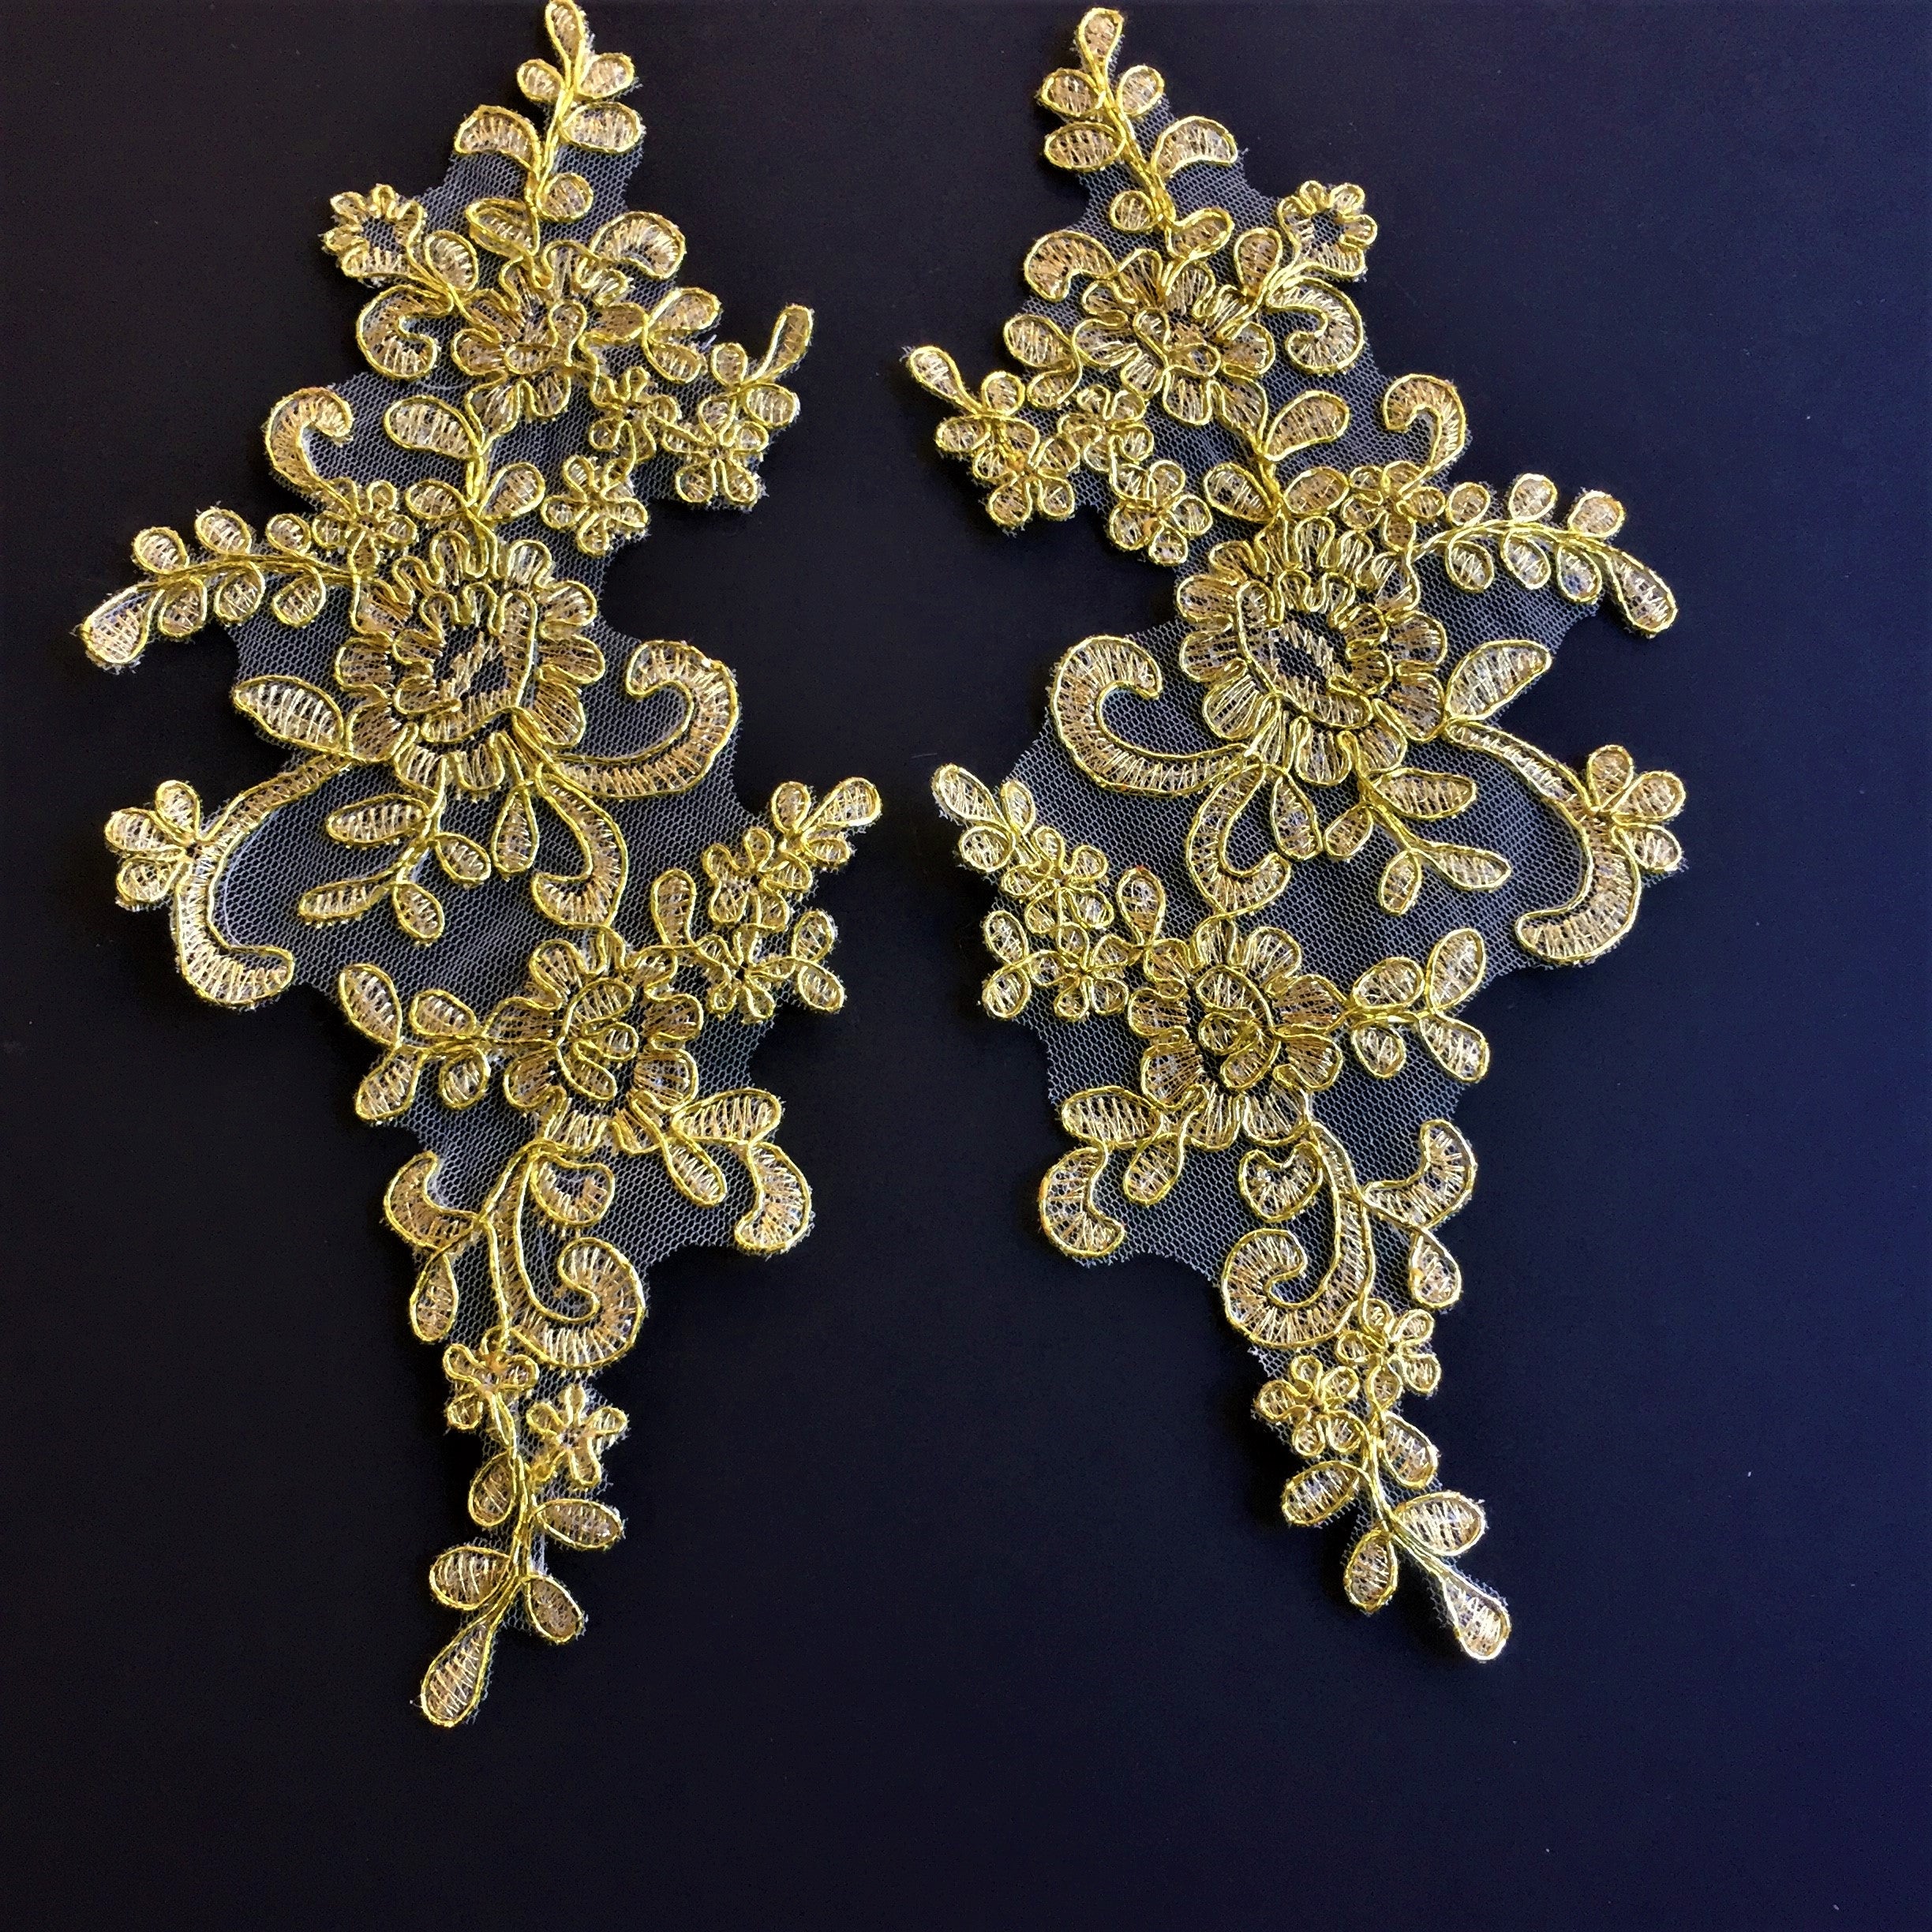 Gold floral embroidered applique pair laying flat on a blue background.  The applique is embroidered with non metallic gold coloured thread.  The flower stems and leaves are outlined with a metallic gold cord. 